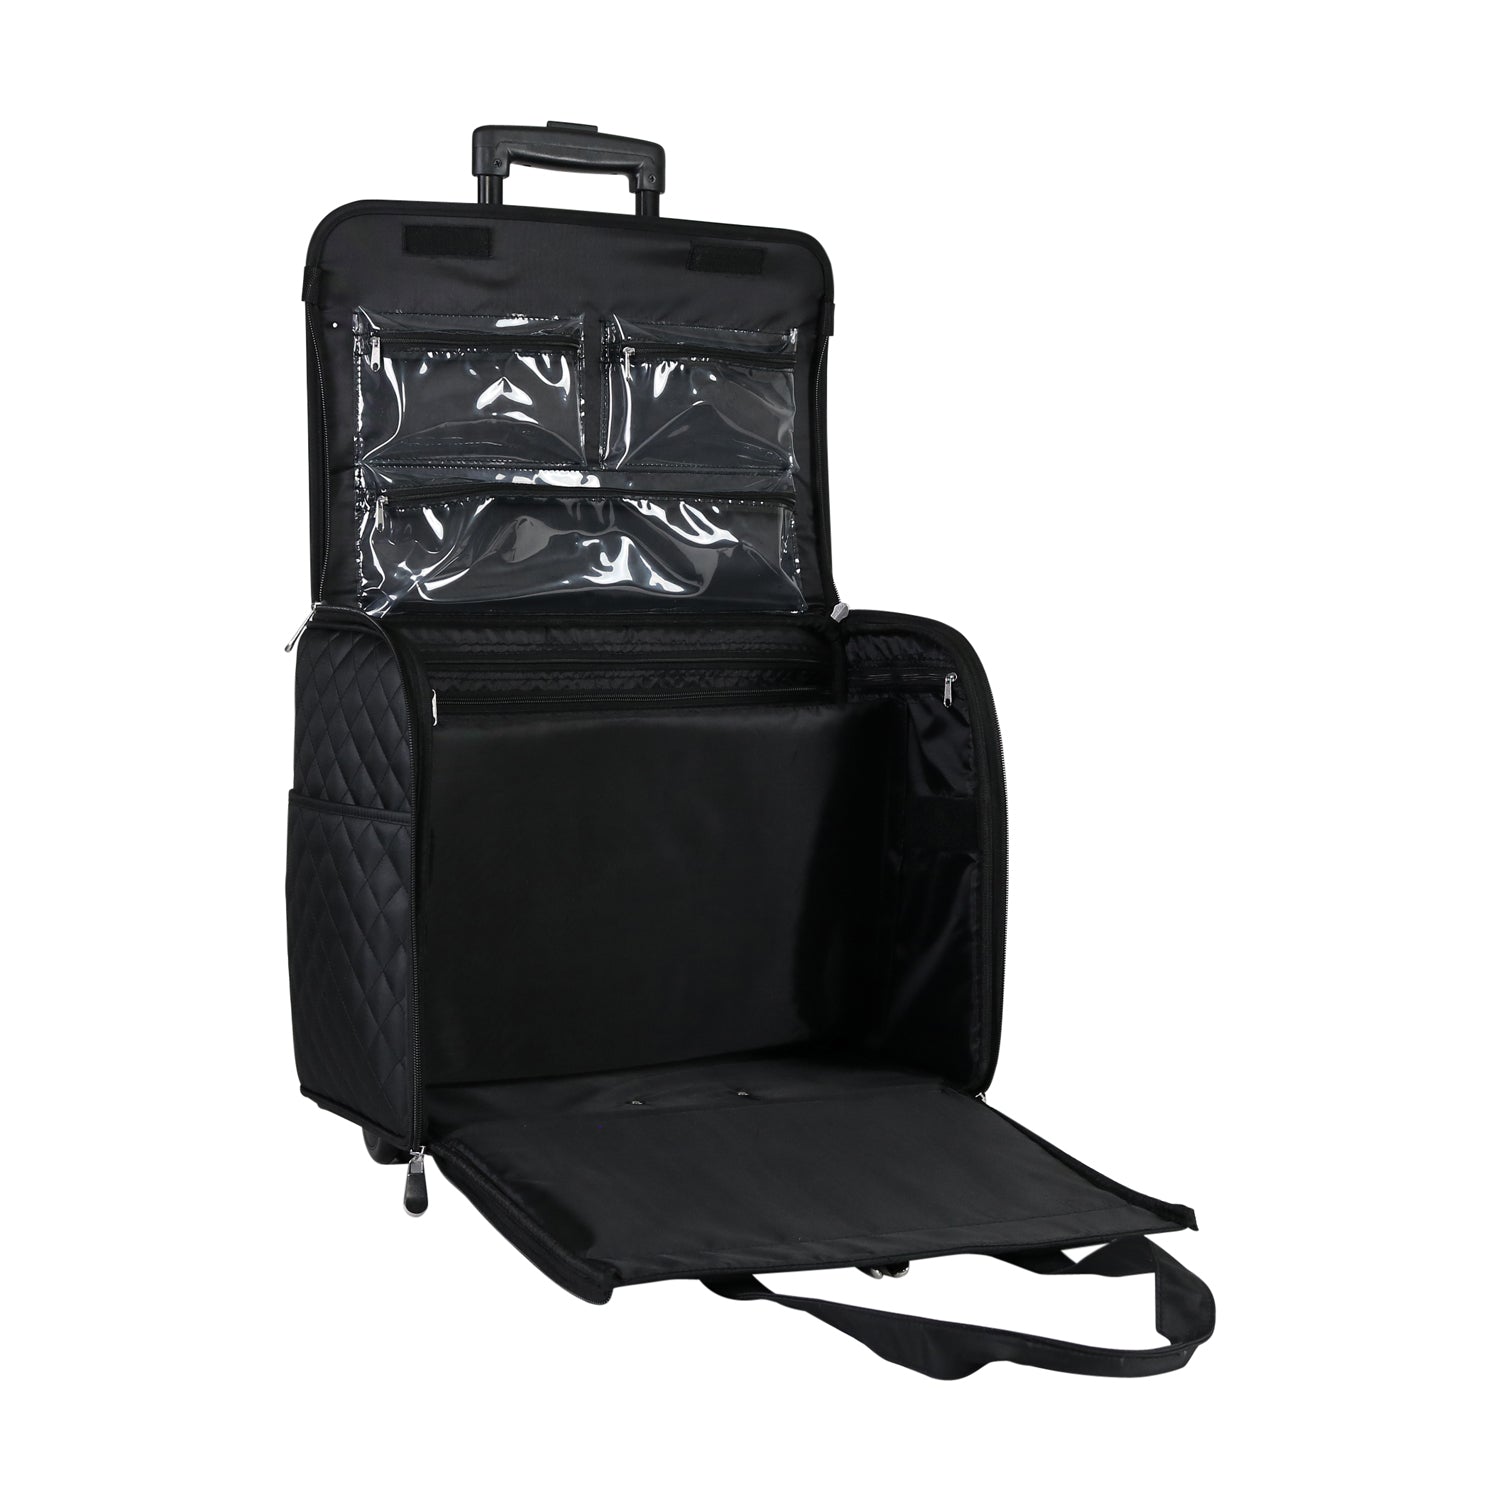  LUXJA Rolling Teacher Bag with Laptop Compartment and  Detachable Dolly, Multifunctional Rolling Teacher Tote Bag (Patent  Pending), Black : Electronics